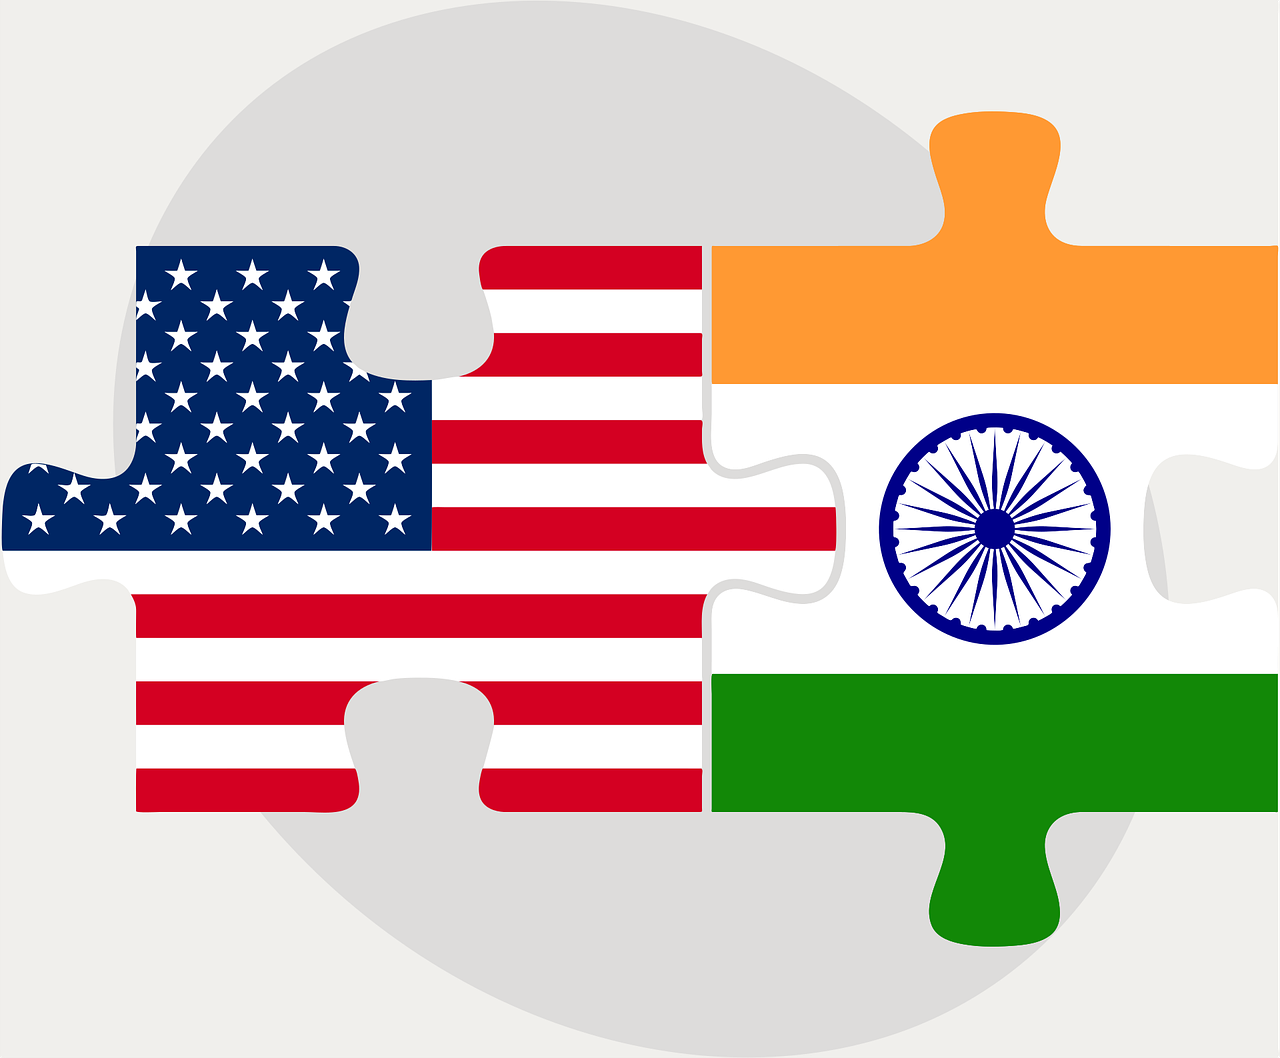 NASSCOM’s Message to the U.S. President-Elect and Vice President-Elect